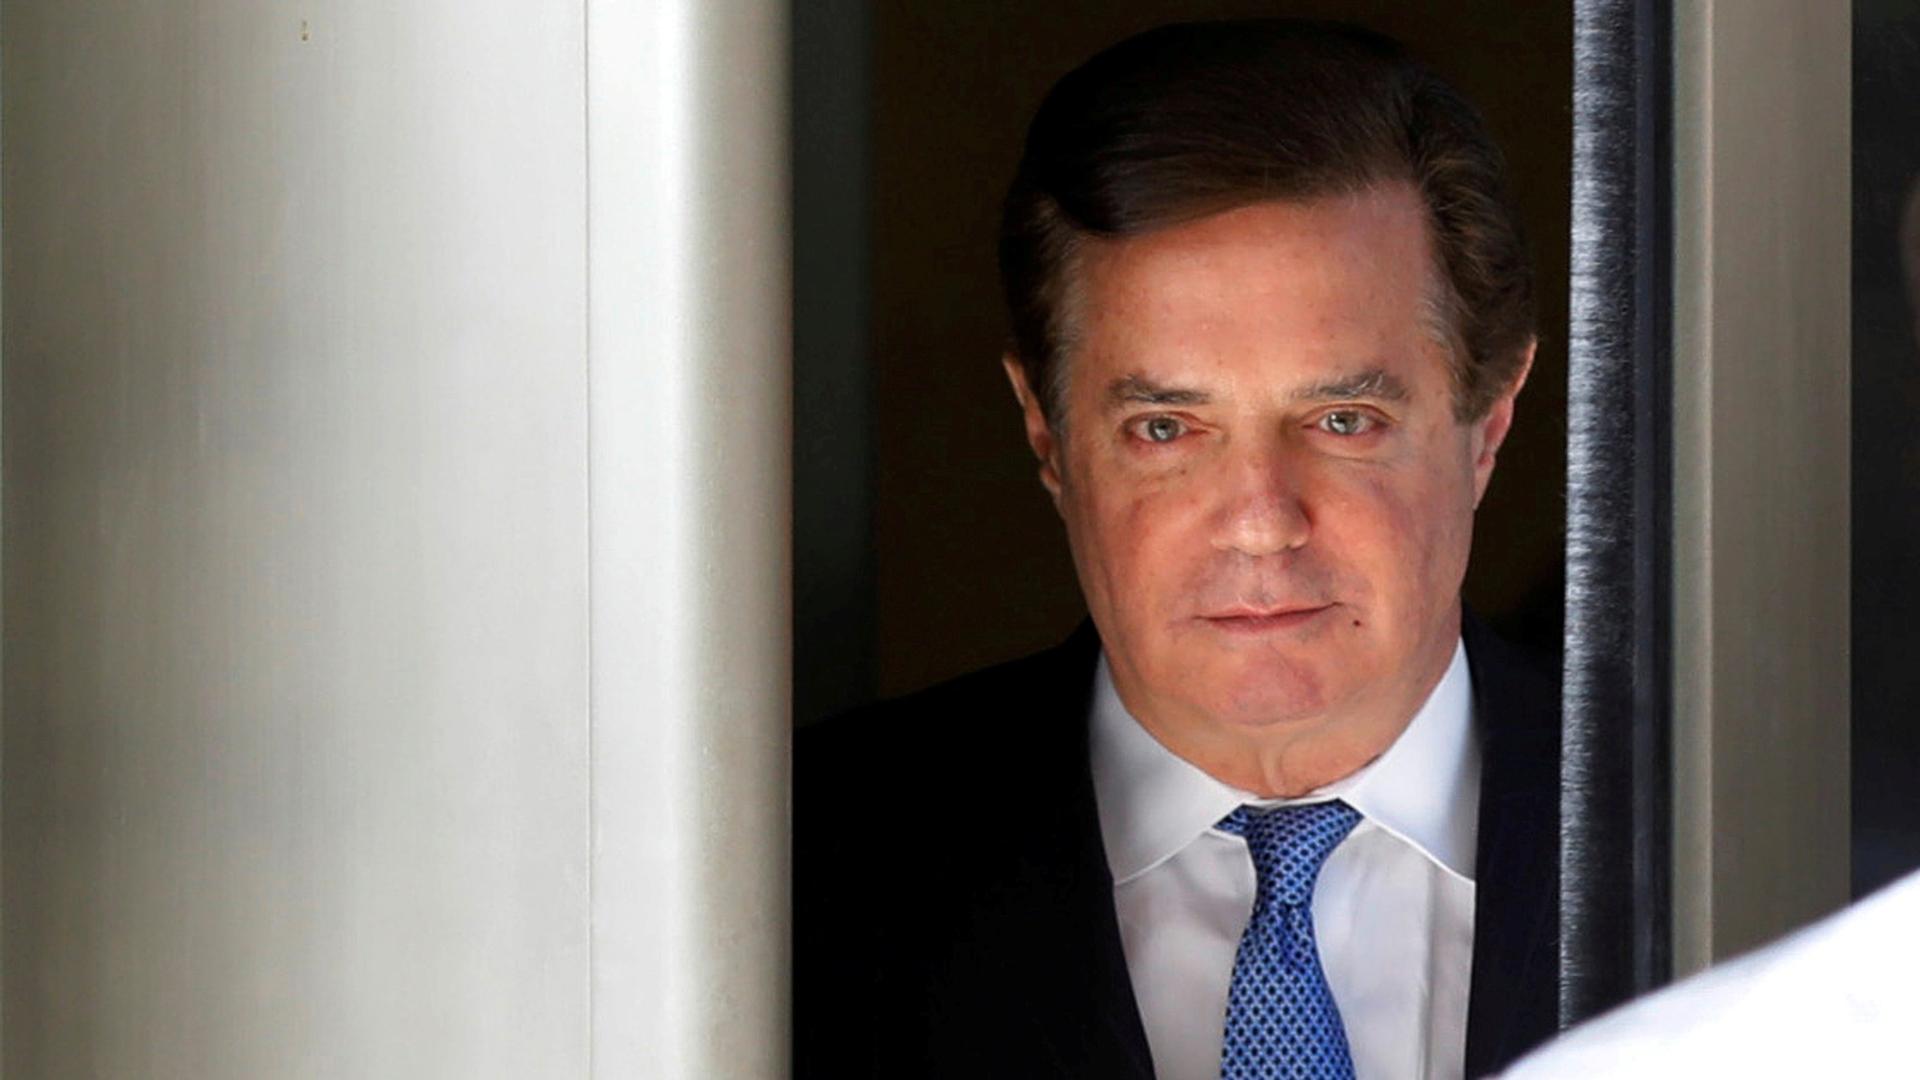 In this close-up photograph, former Trump campaign manager Paul Manafort is seen walking out of the US District Court in Washington DC, dressed in a suit with a blue tie.